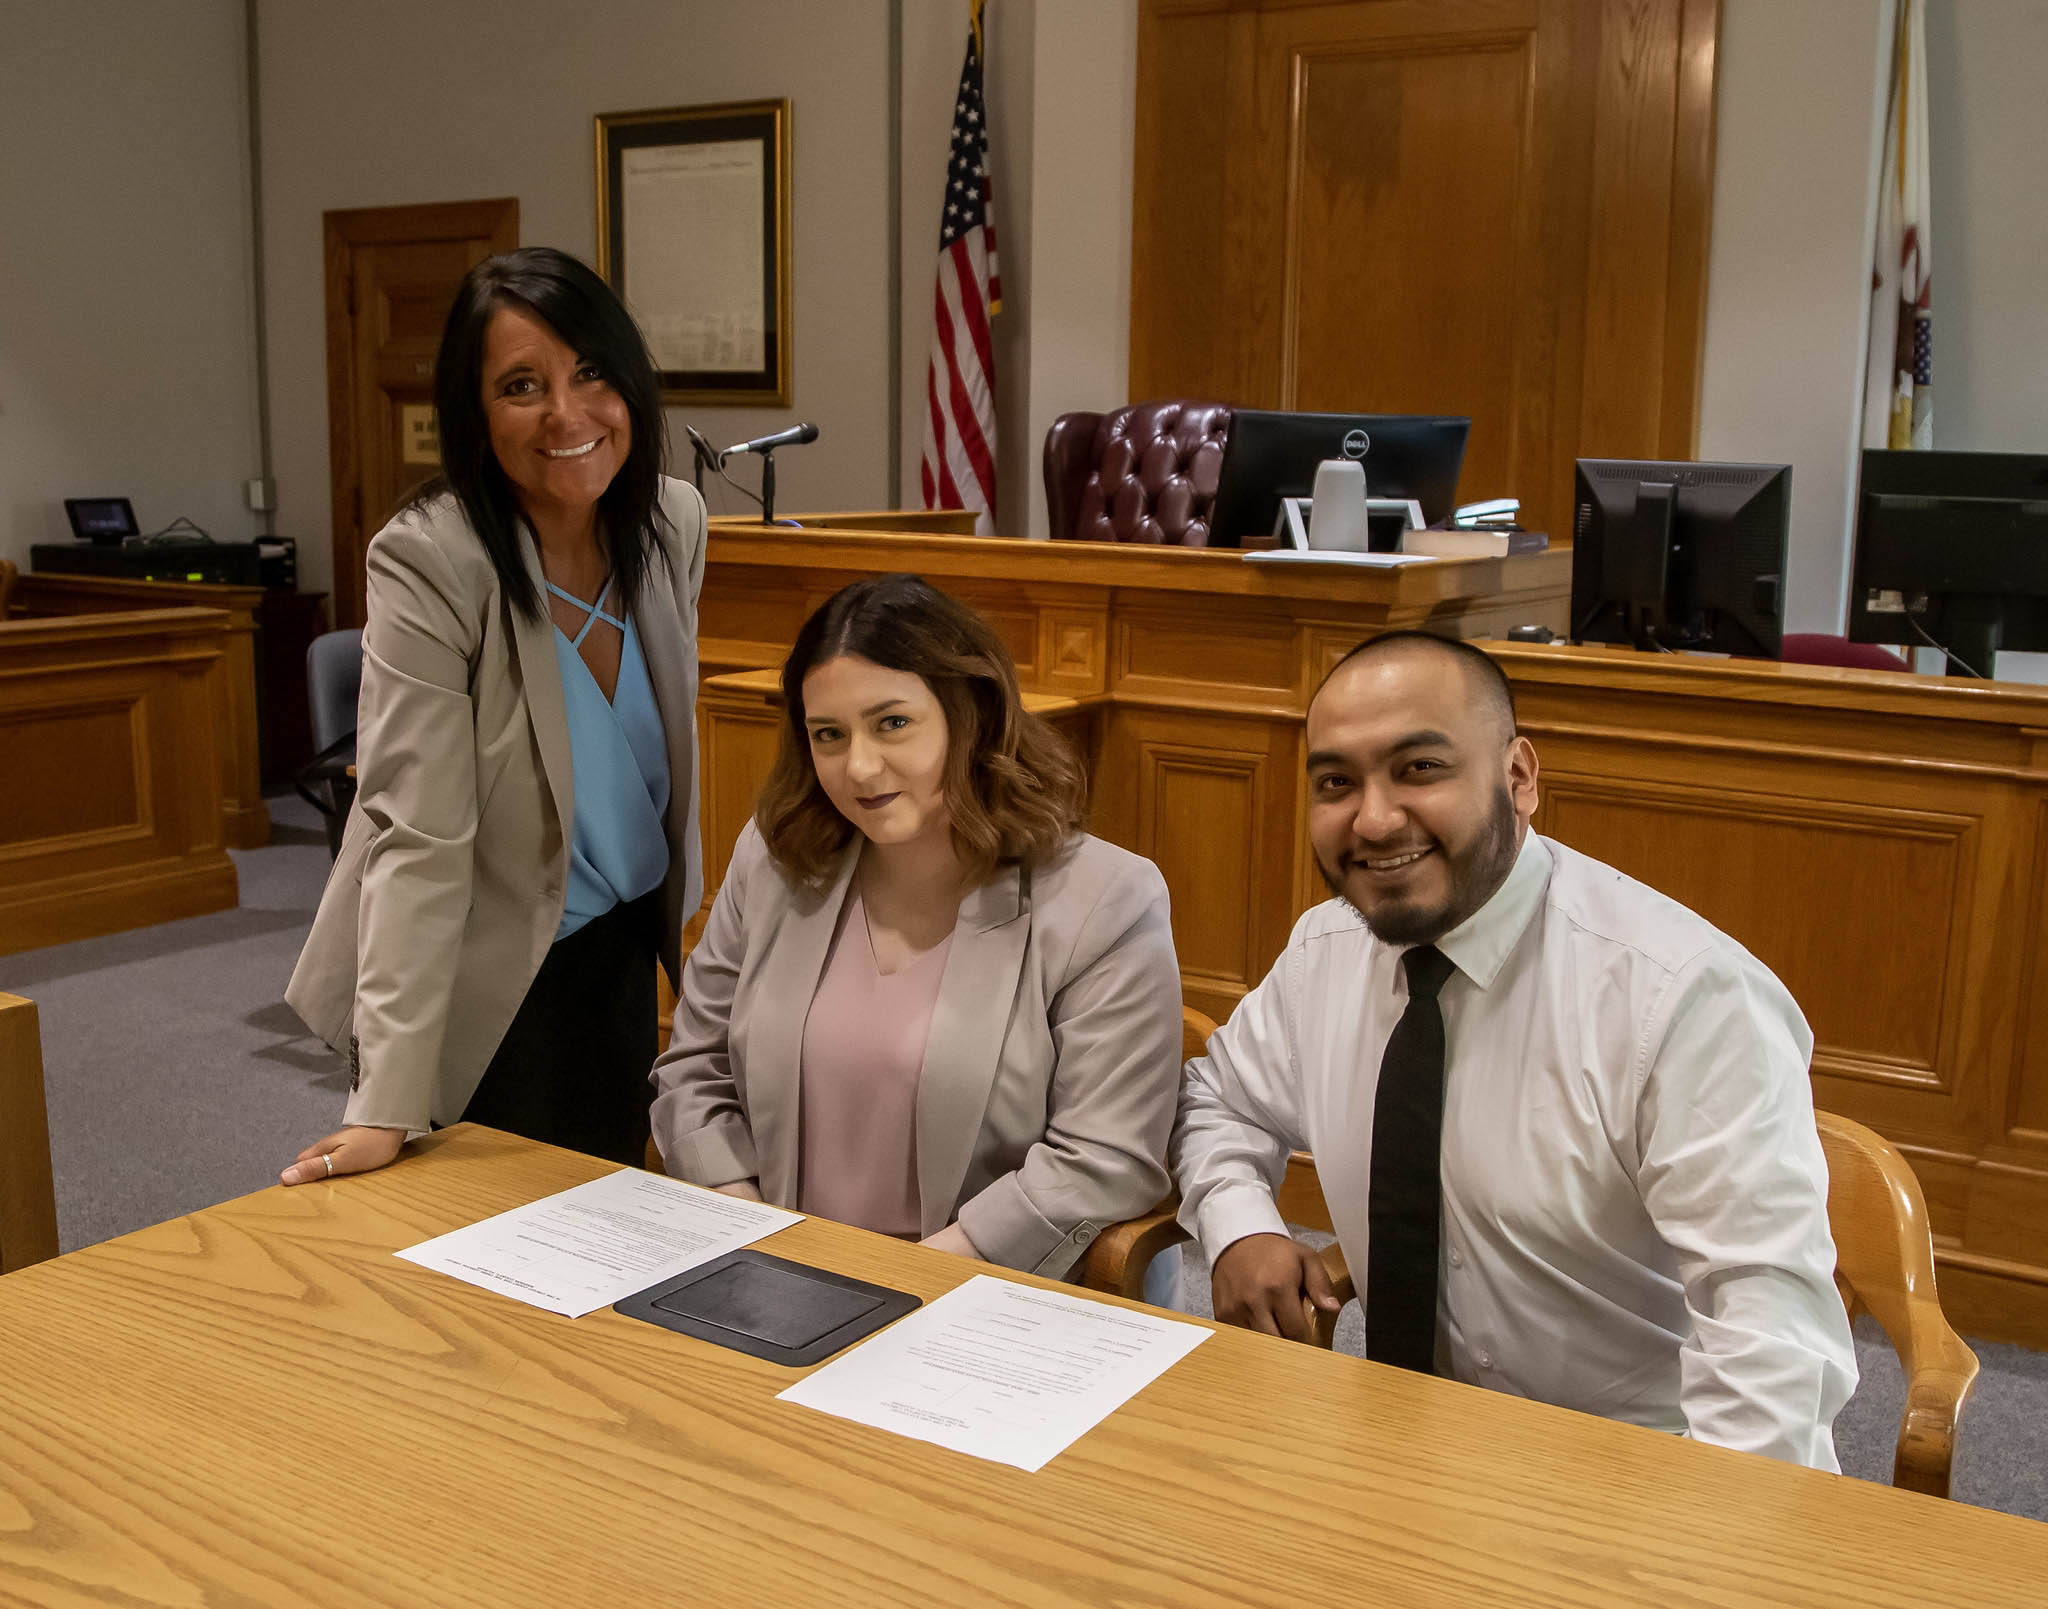 L&C Paralegal Program Coordinator Becky Gockel and students, Audrey Gorline and Gabriel Calixto, meet in a Madison County courtroom. Jan Dona, L&C Marketing & PR.